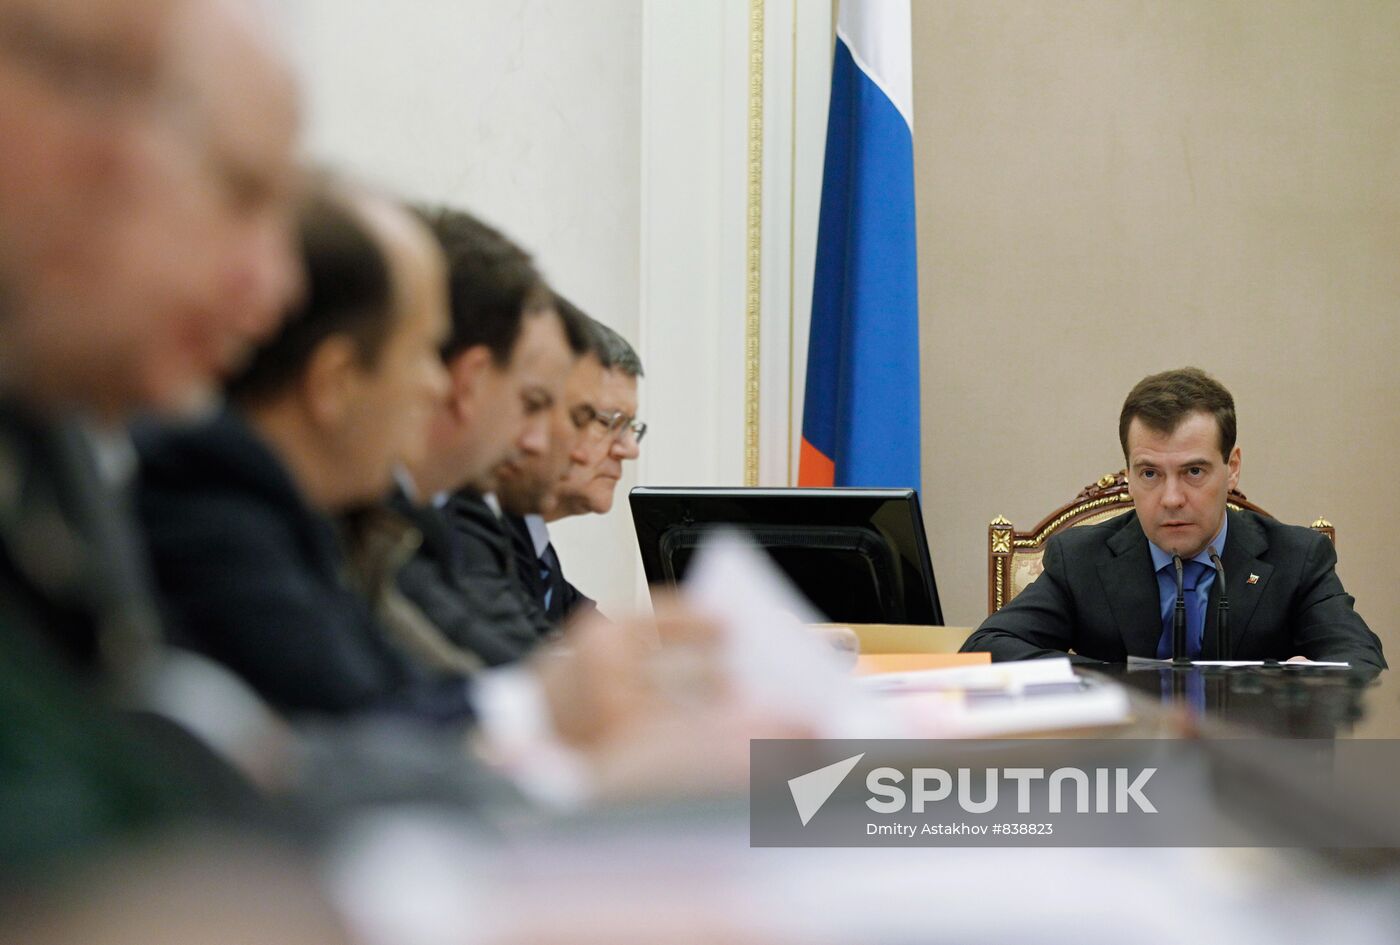 Dmitry Medvedev chairs Anti-Corruption Council meeting